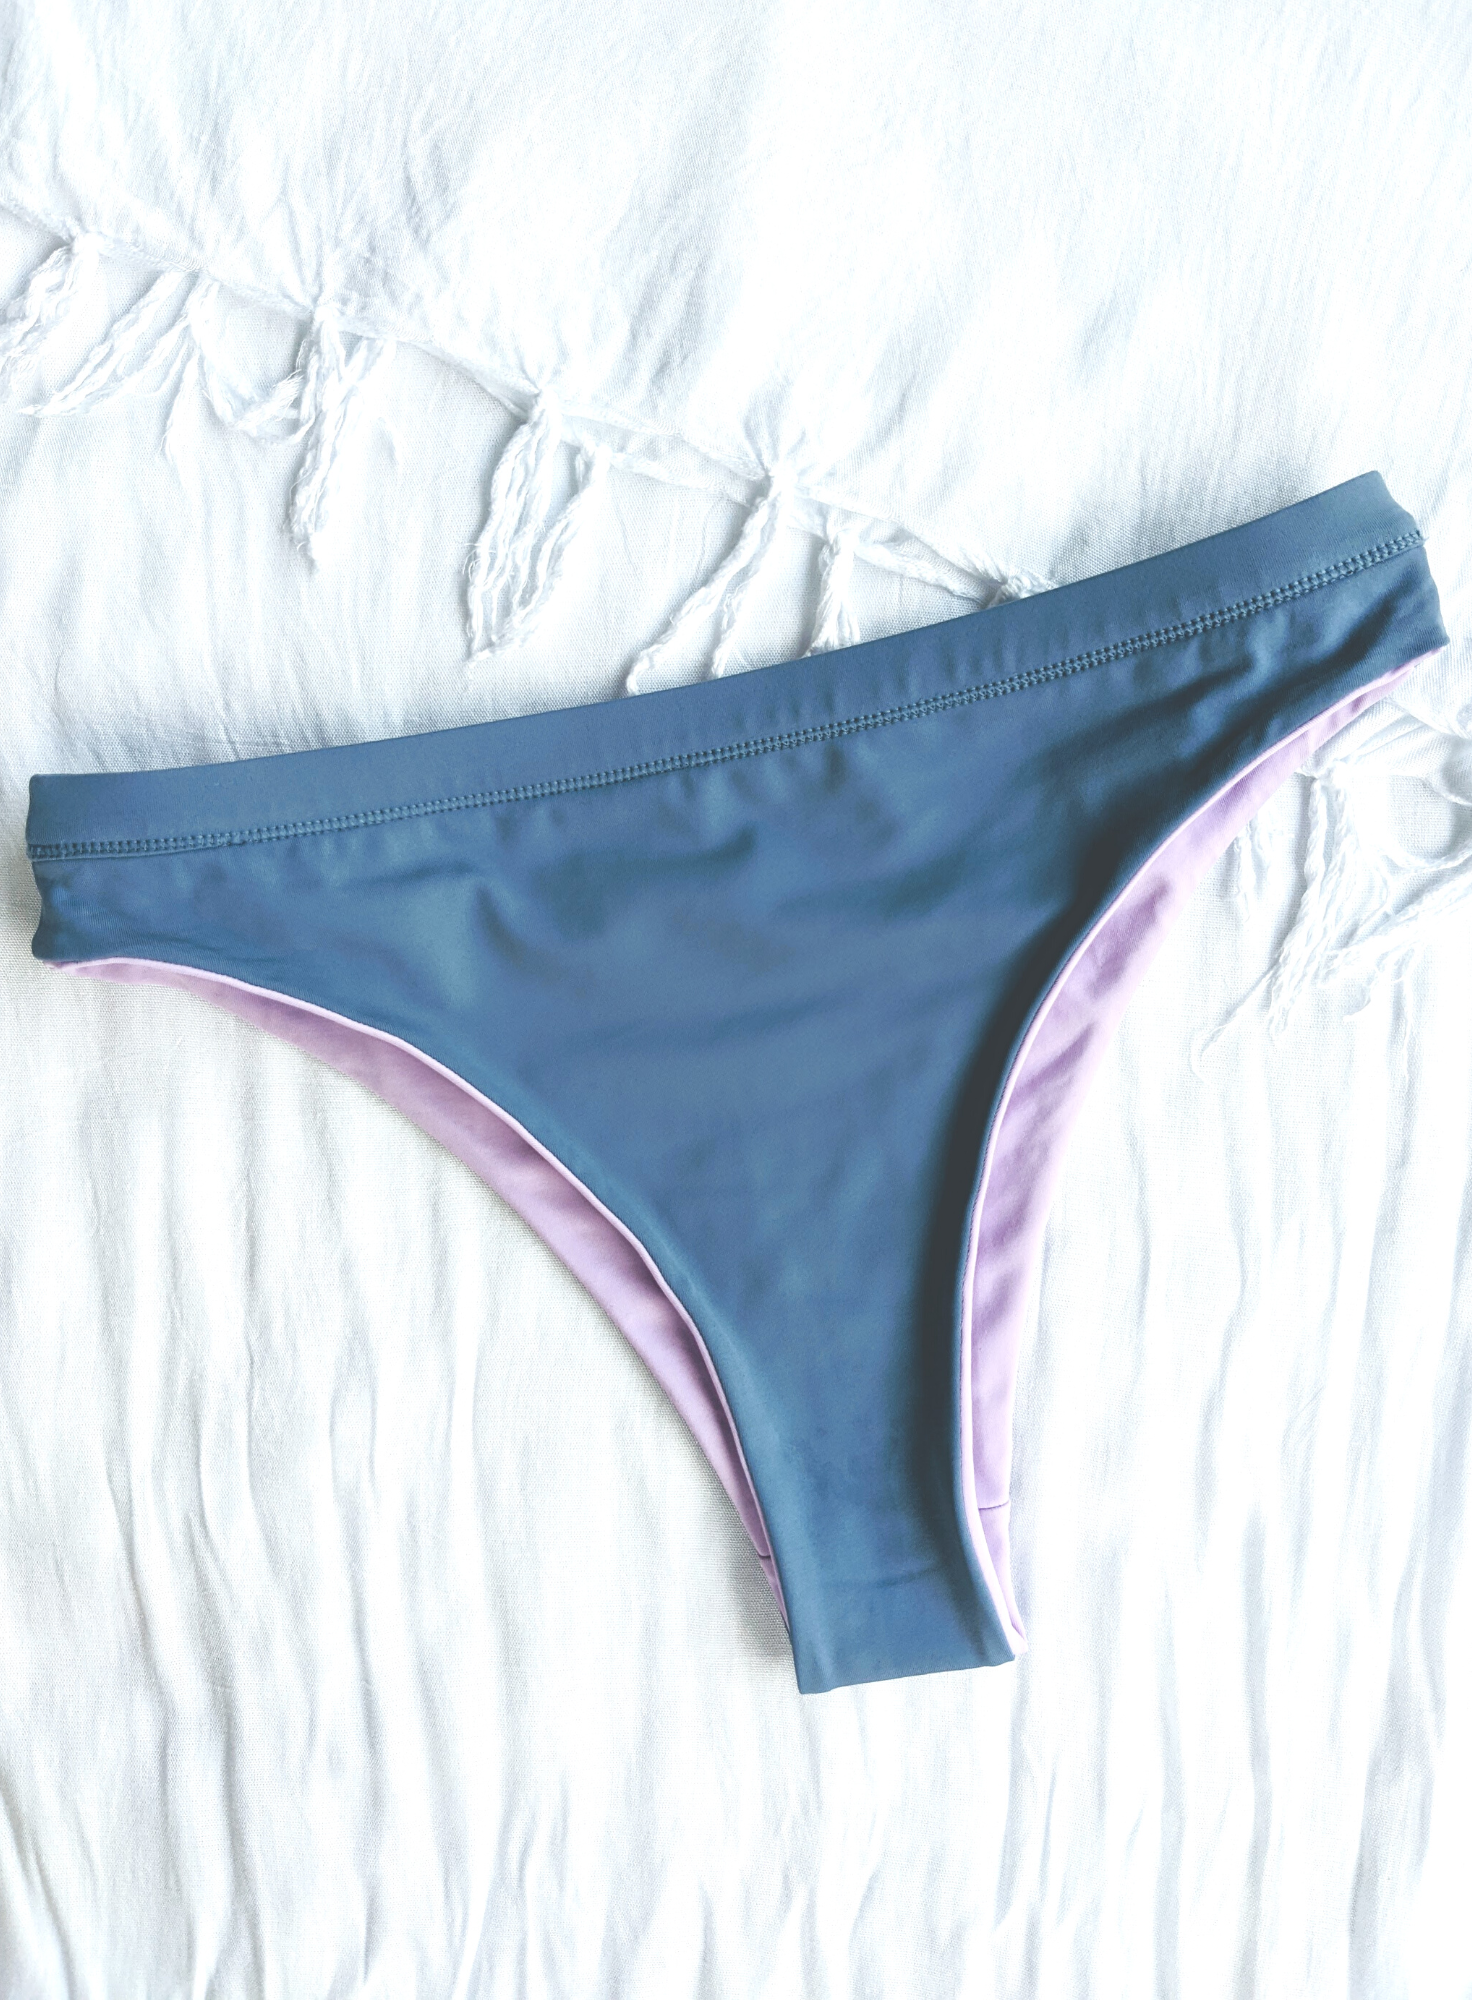 Reversible Blue and Lilac Medium High Cut Bikini Bottom Made From Eco Friendly Recycled Regenerated Fabric Blue Front Flat Lay View